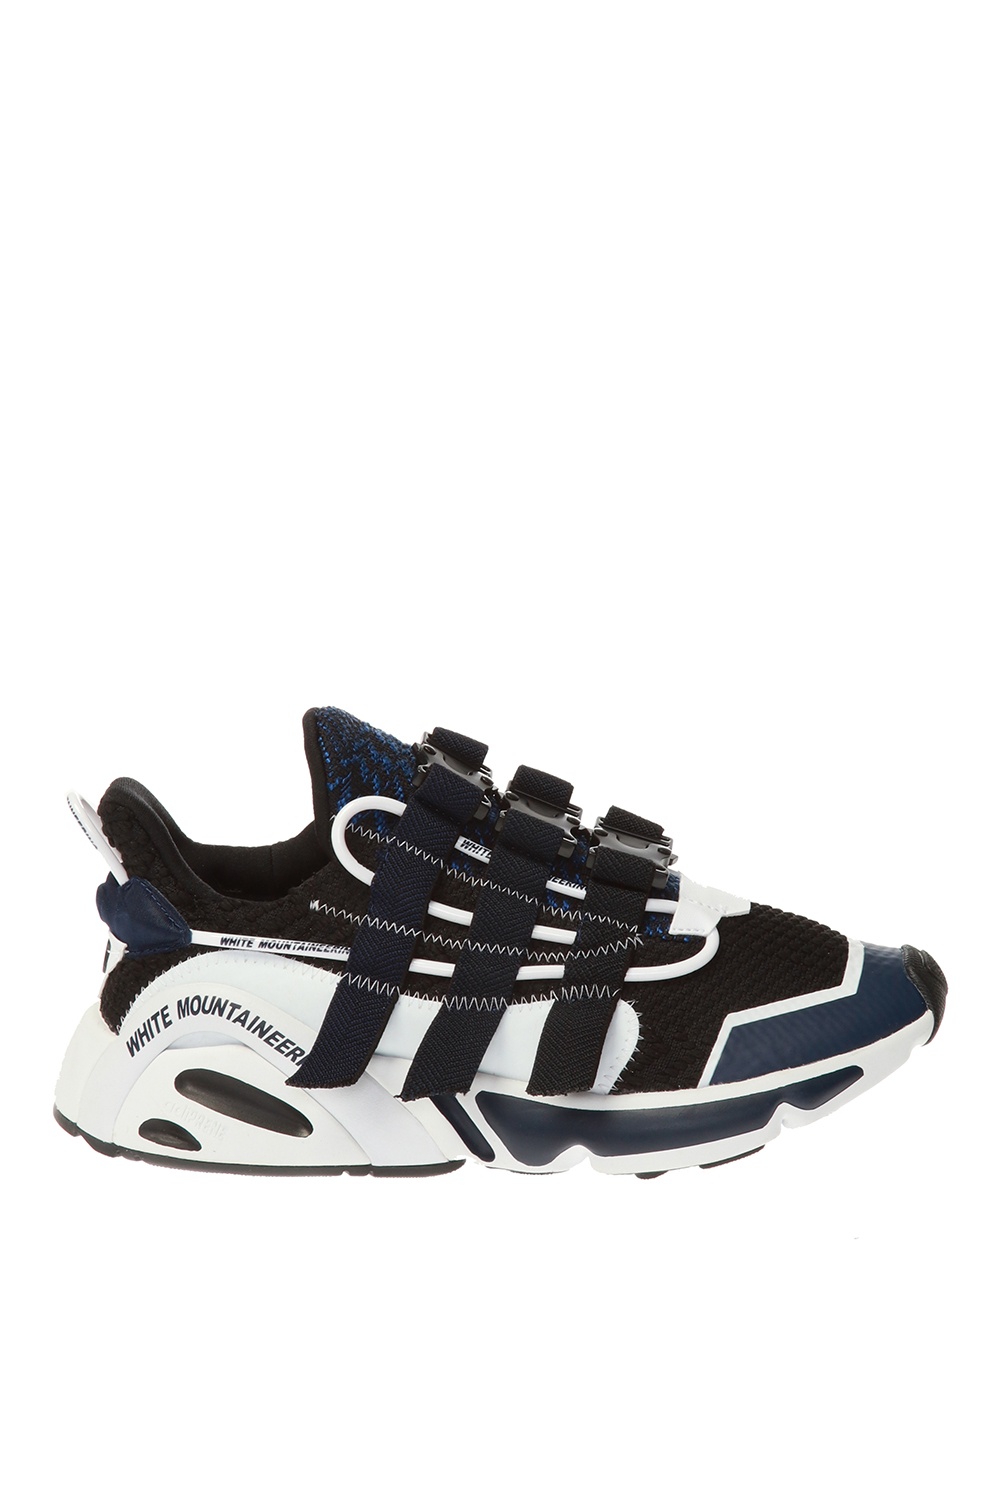 adidas white mountaineering questions